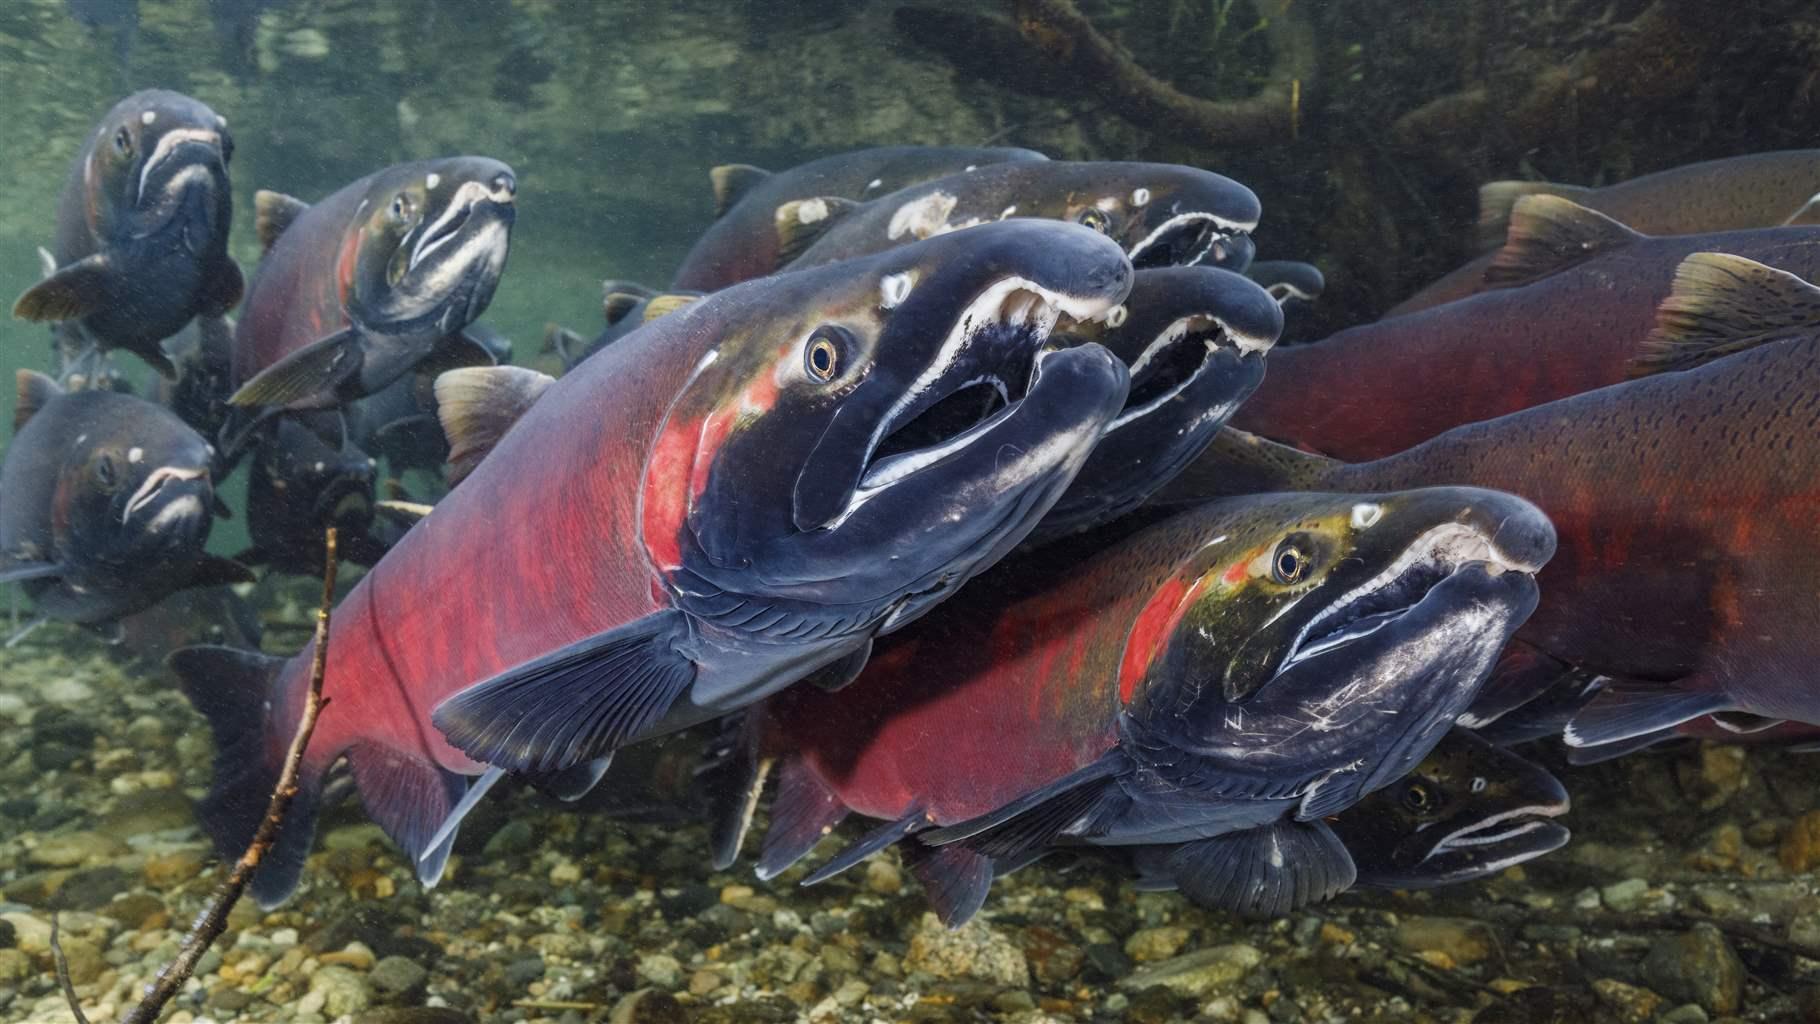 A school of salmon swimming at the bottom of the water with vibrant stripes of reds and pinks along their bodies.